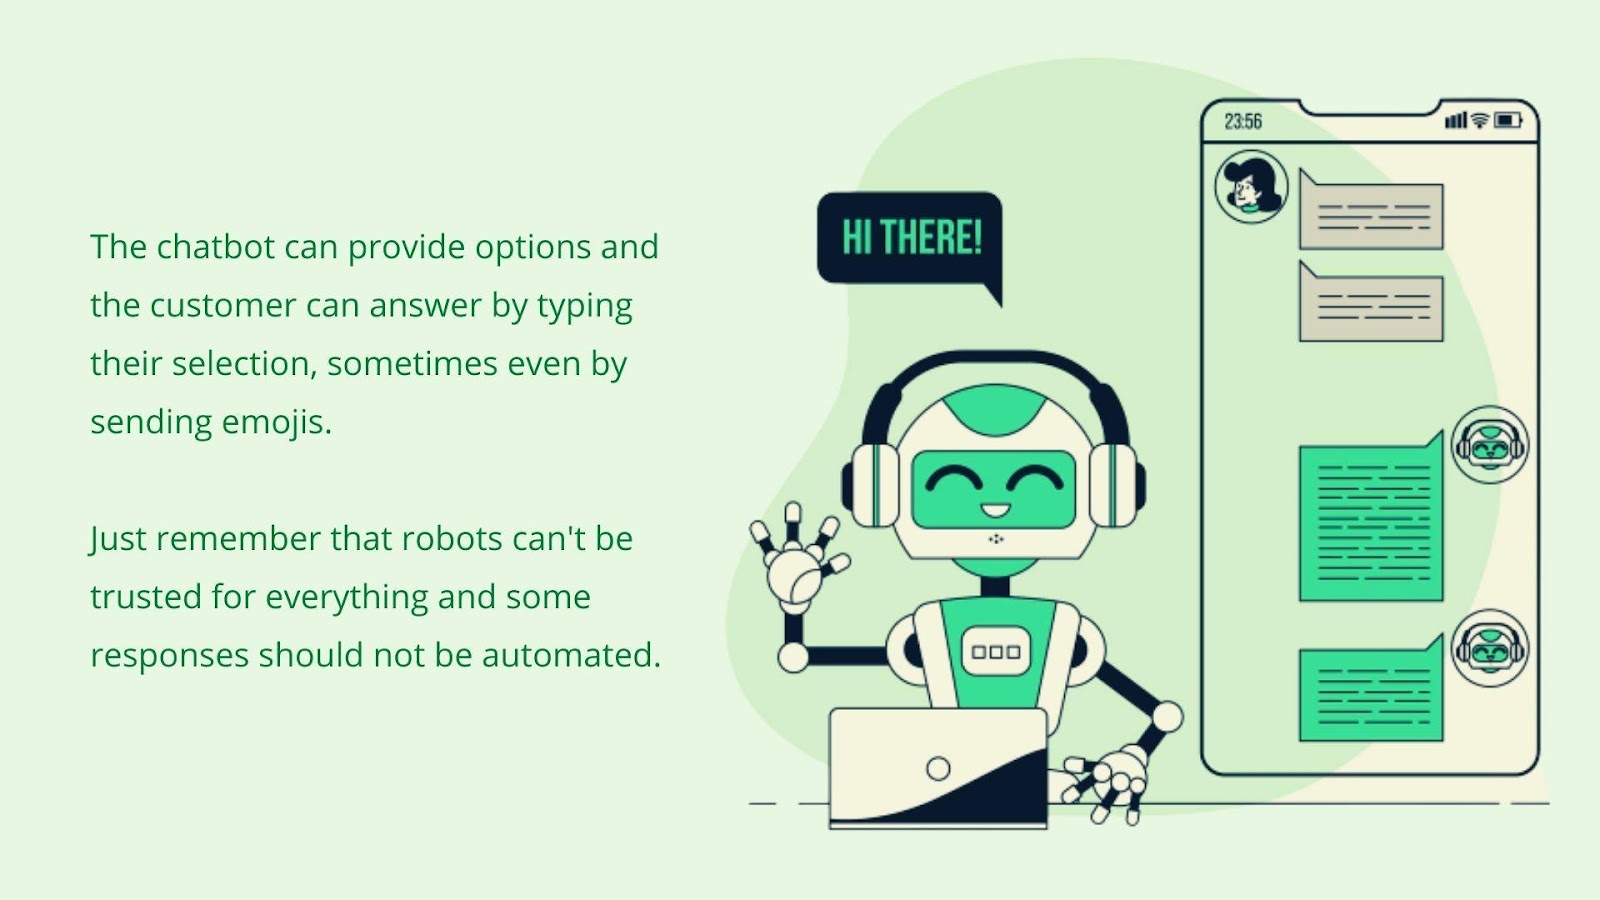 Illustration of a robot chatting with a customer on WhatsApp, accompanied by the paragraph: “The chatbot can provide options, and the customer can answer by typing their selection, sometimes even by sending emojis. Just remember that robots can't be trusted for everything, and some responses should not be automated.”